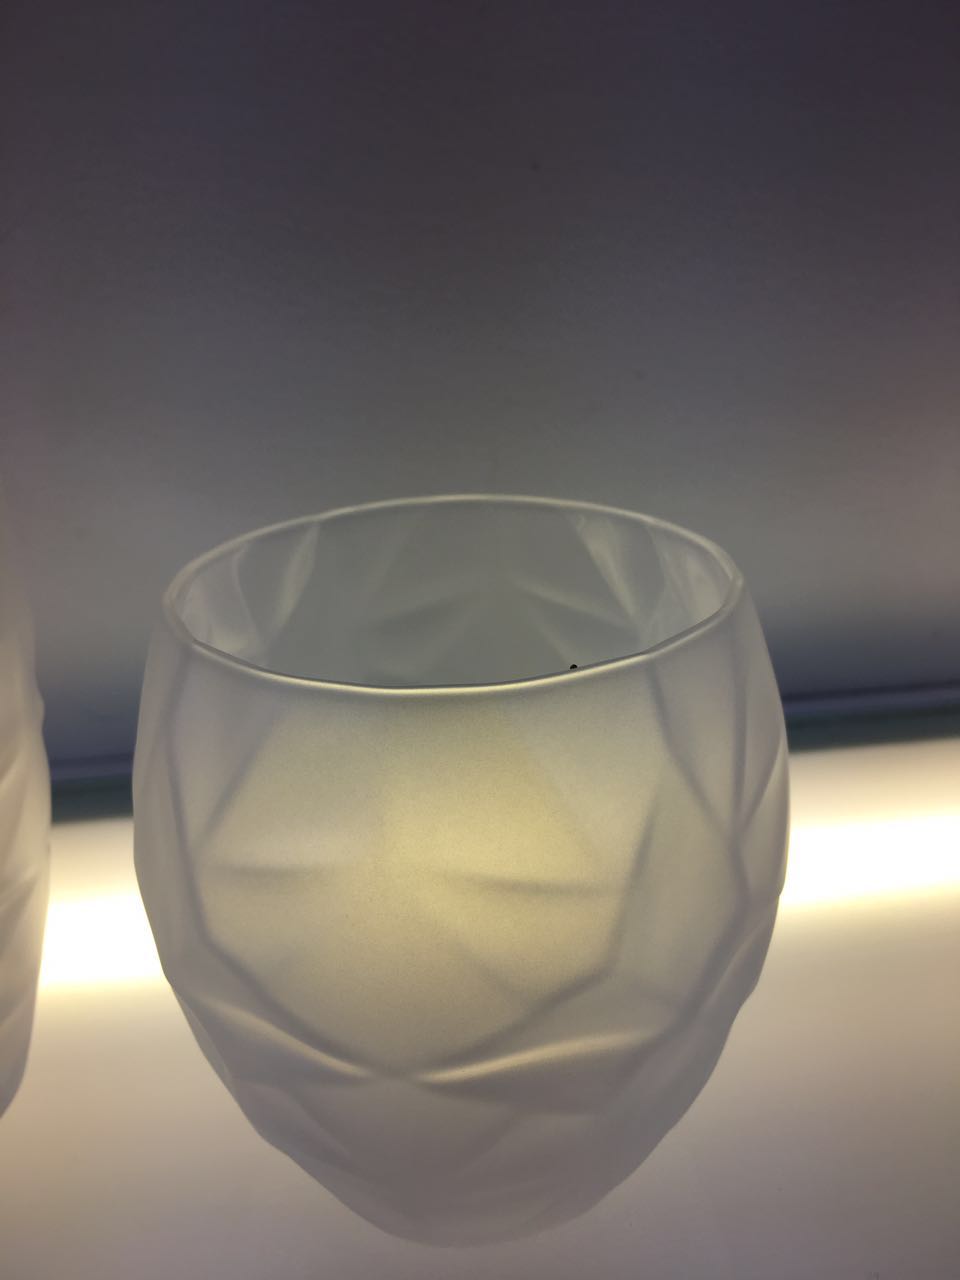 Application of the water-based glass/metal baking paint on glassware